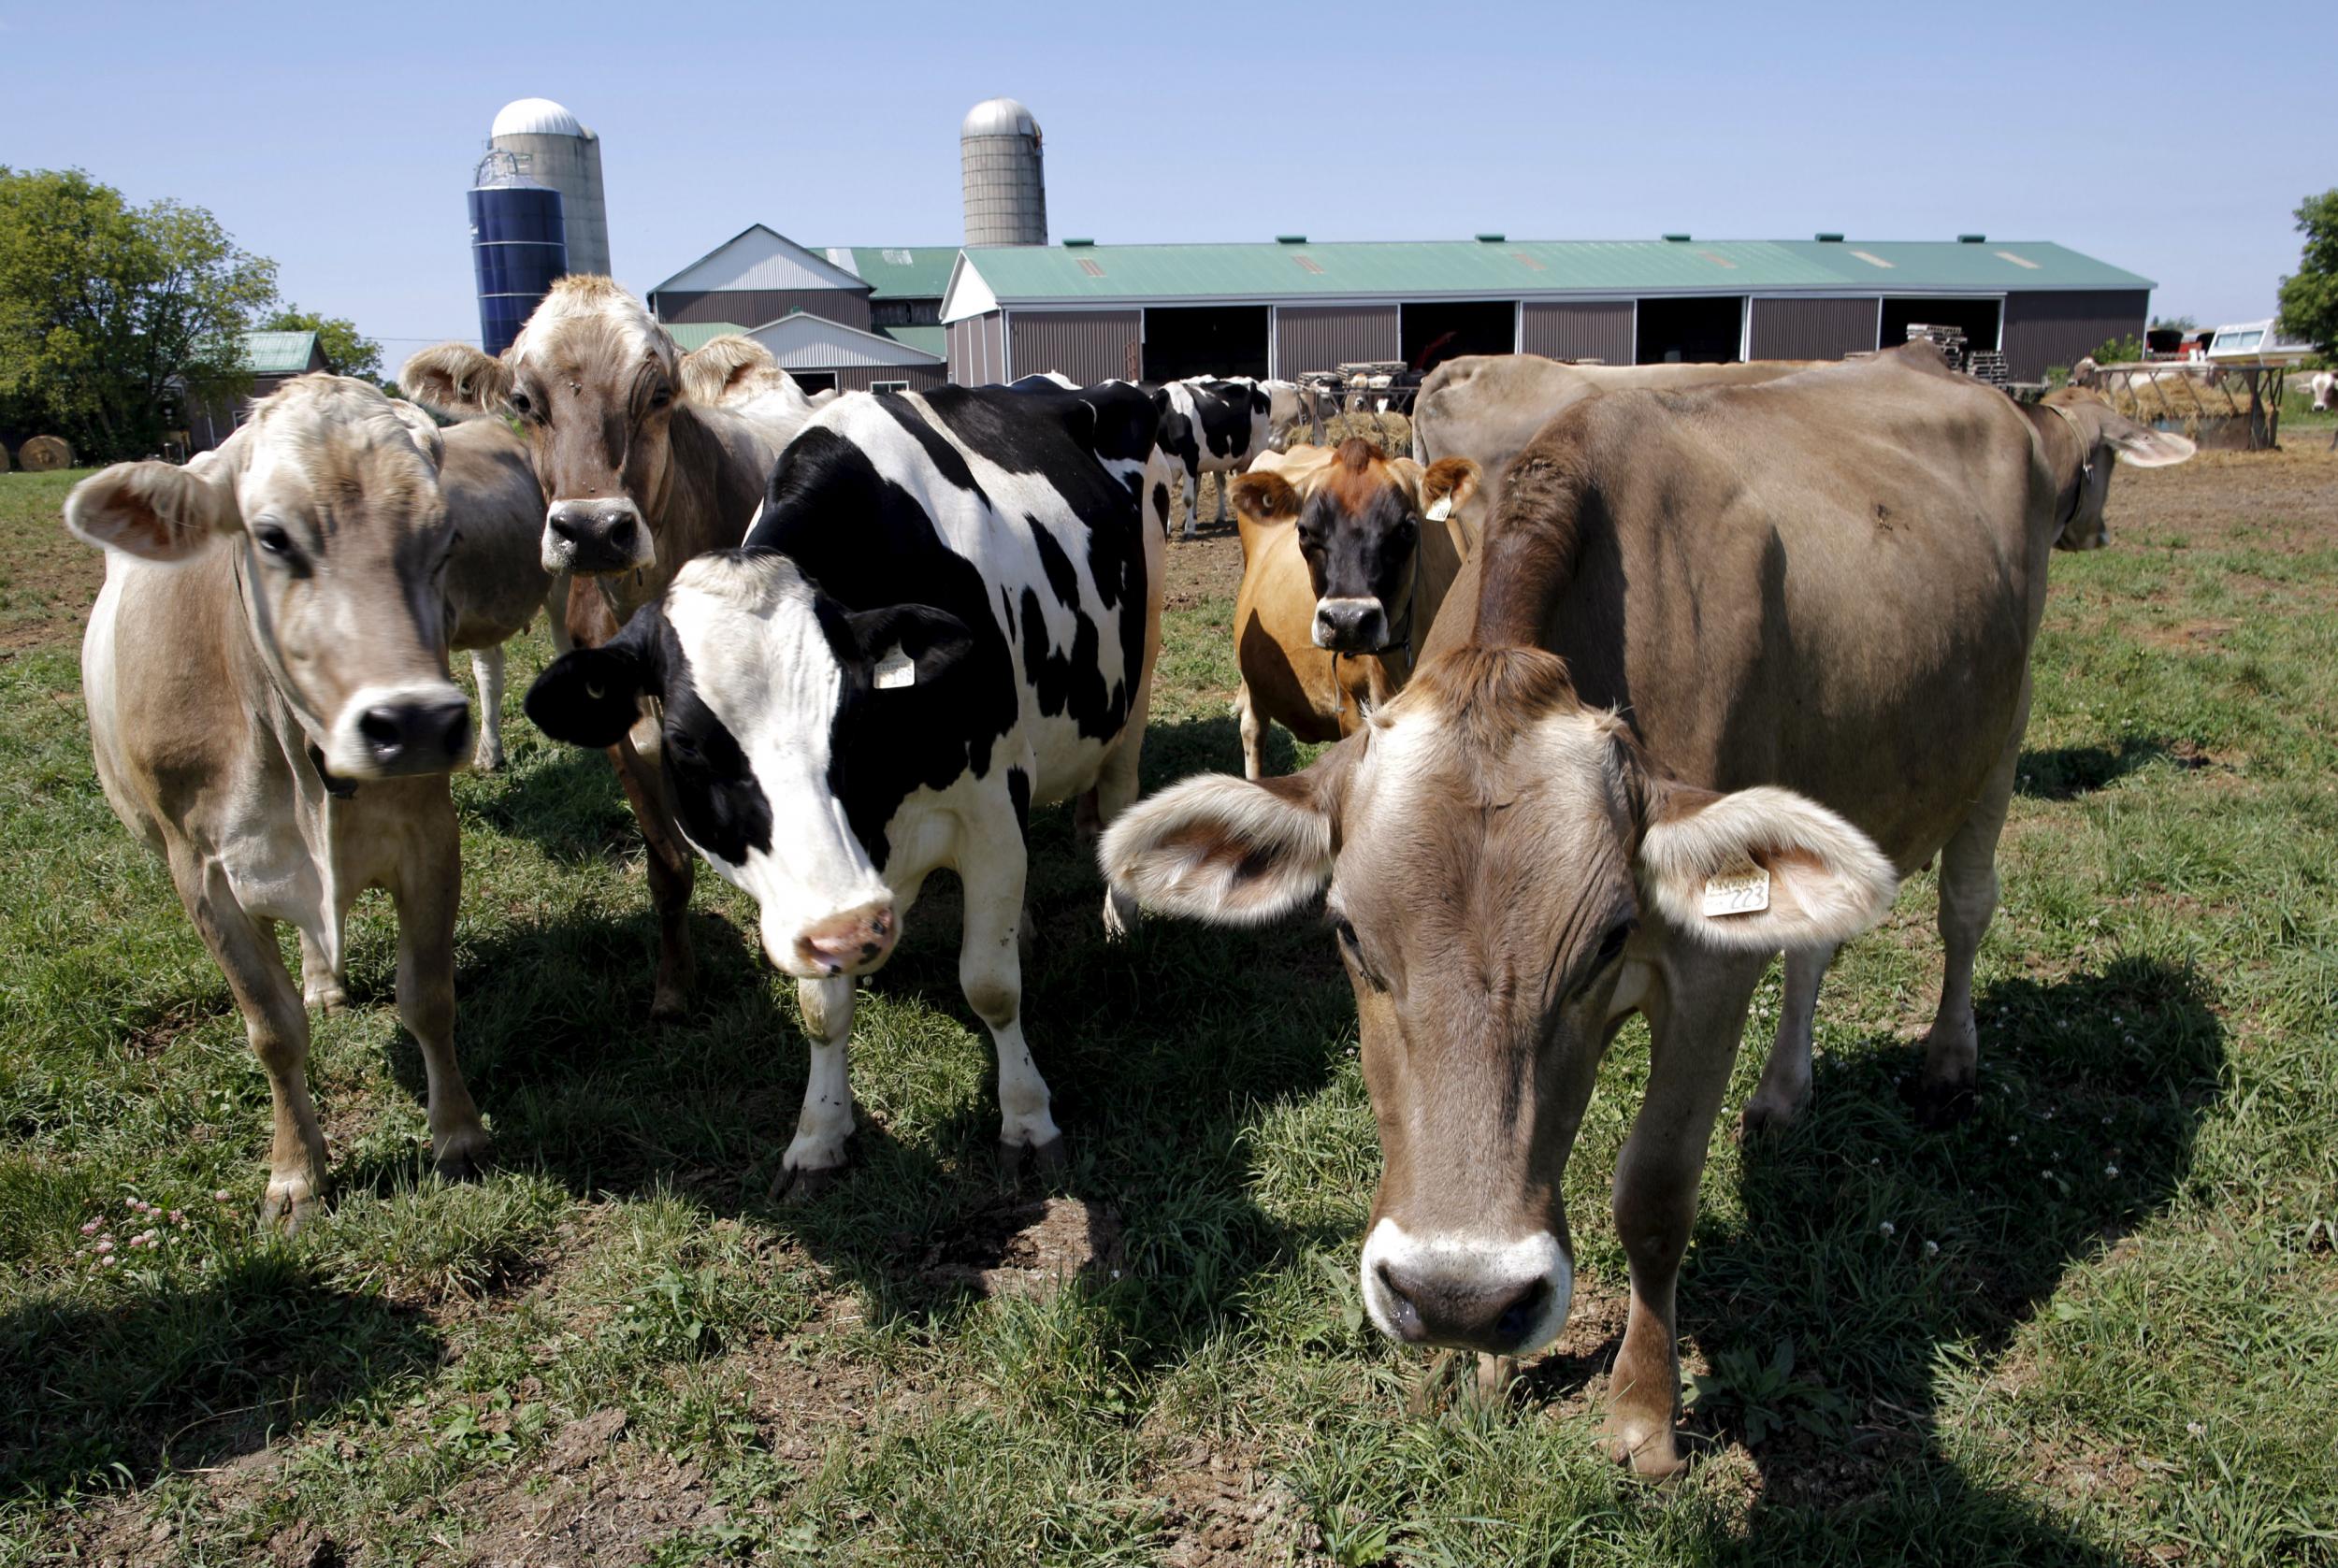 Found in Europe and the US, the bacteria can cause cows to develop a number of deadly conditions, though it is not thought to threaten food safety